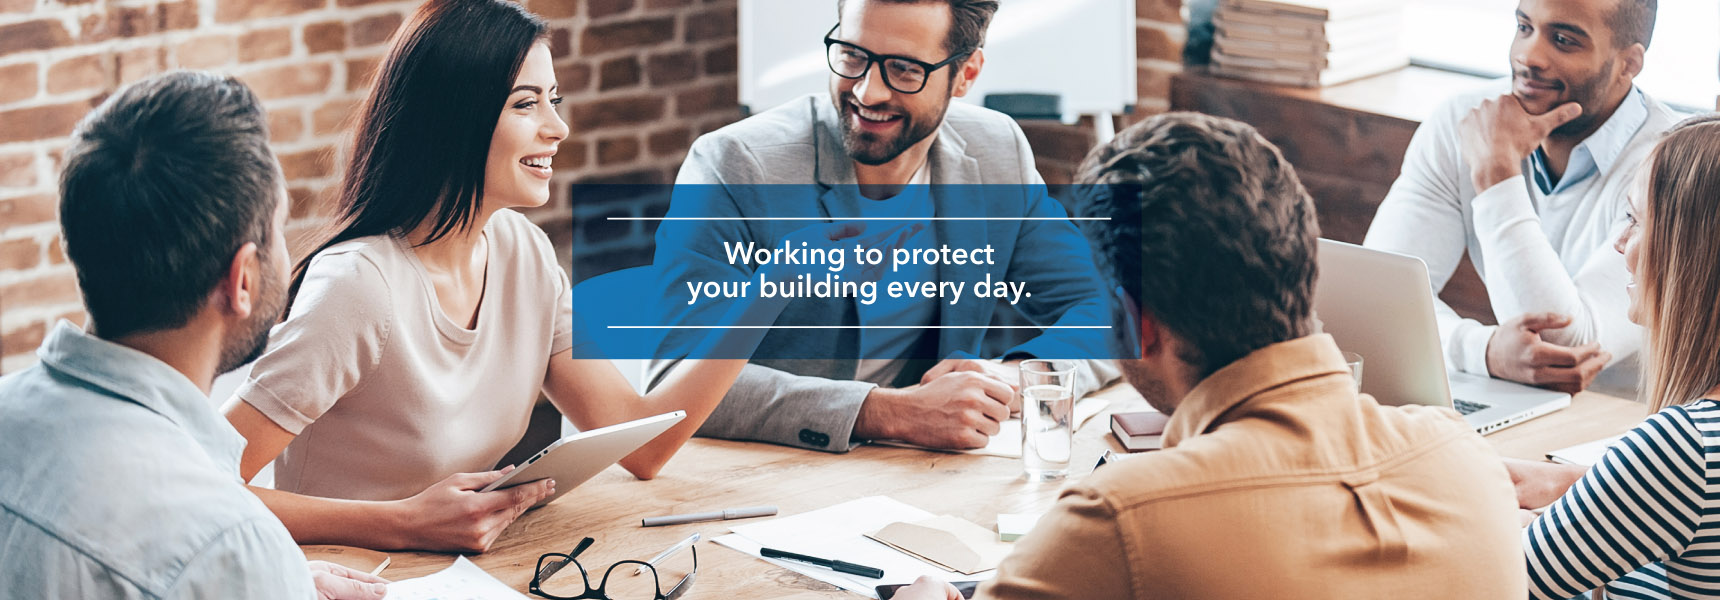 Working to protect your building every day